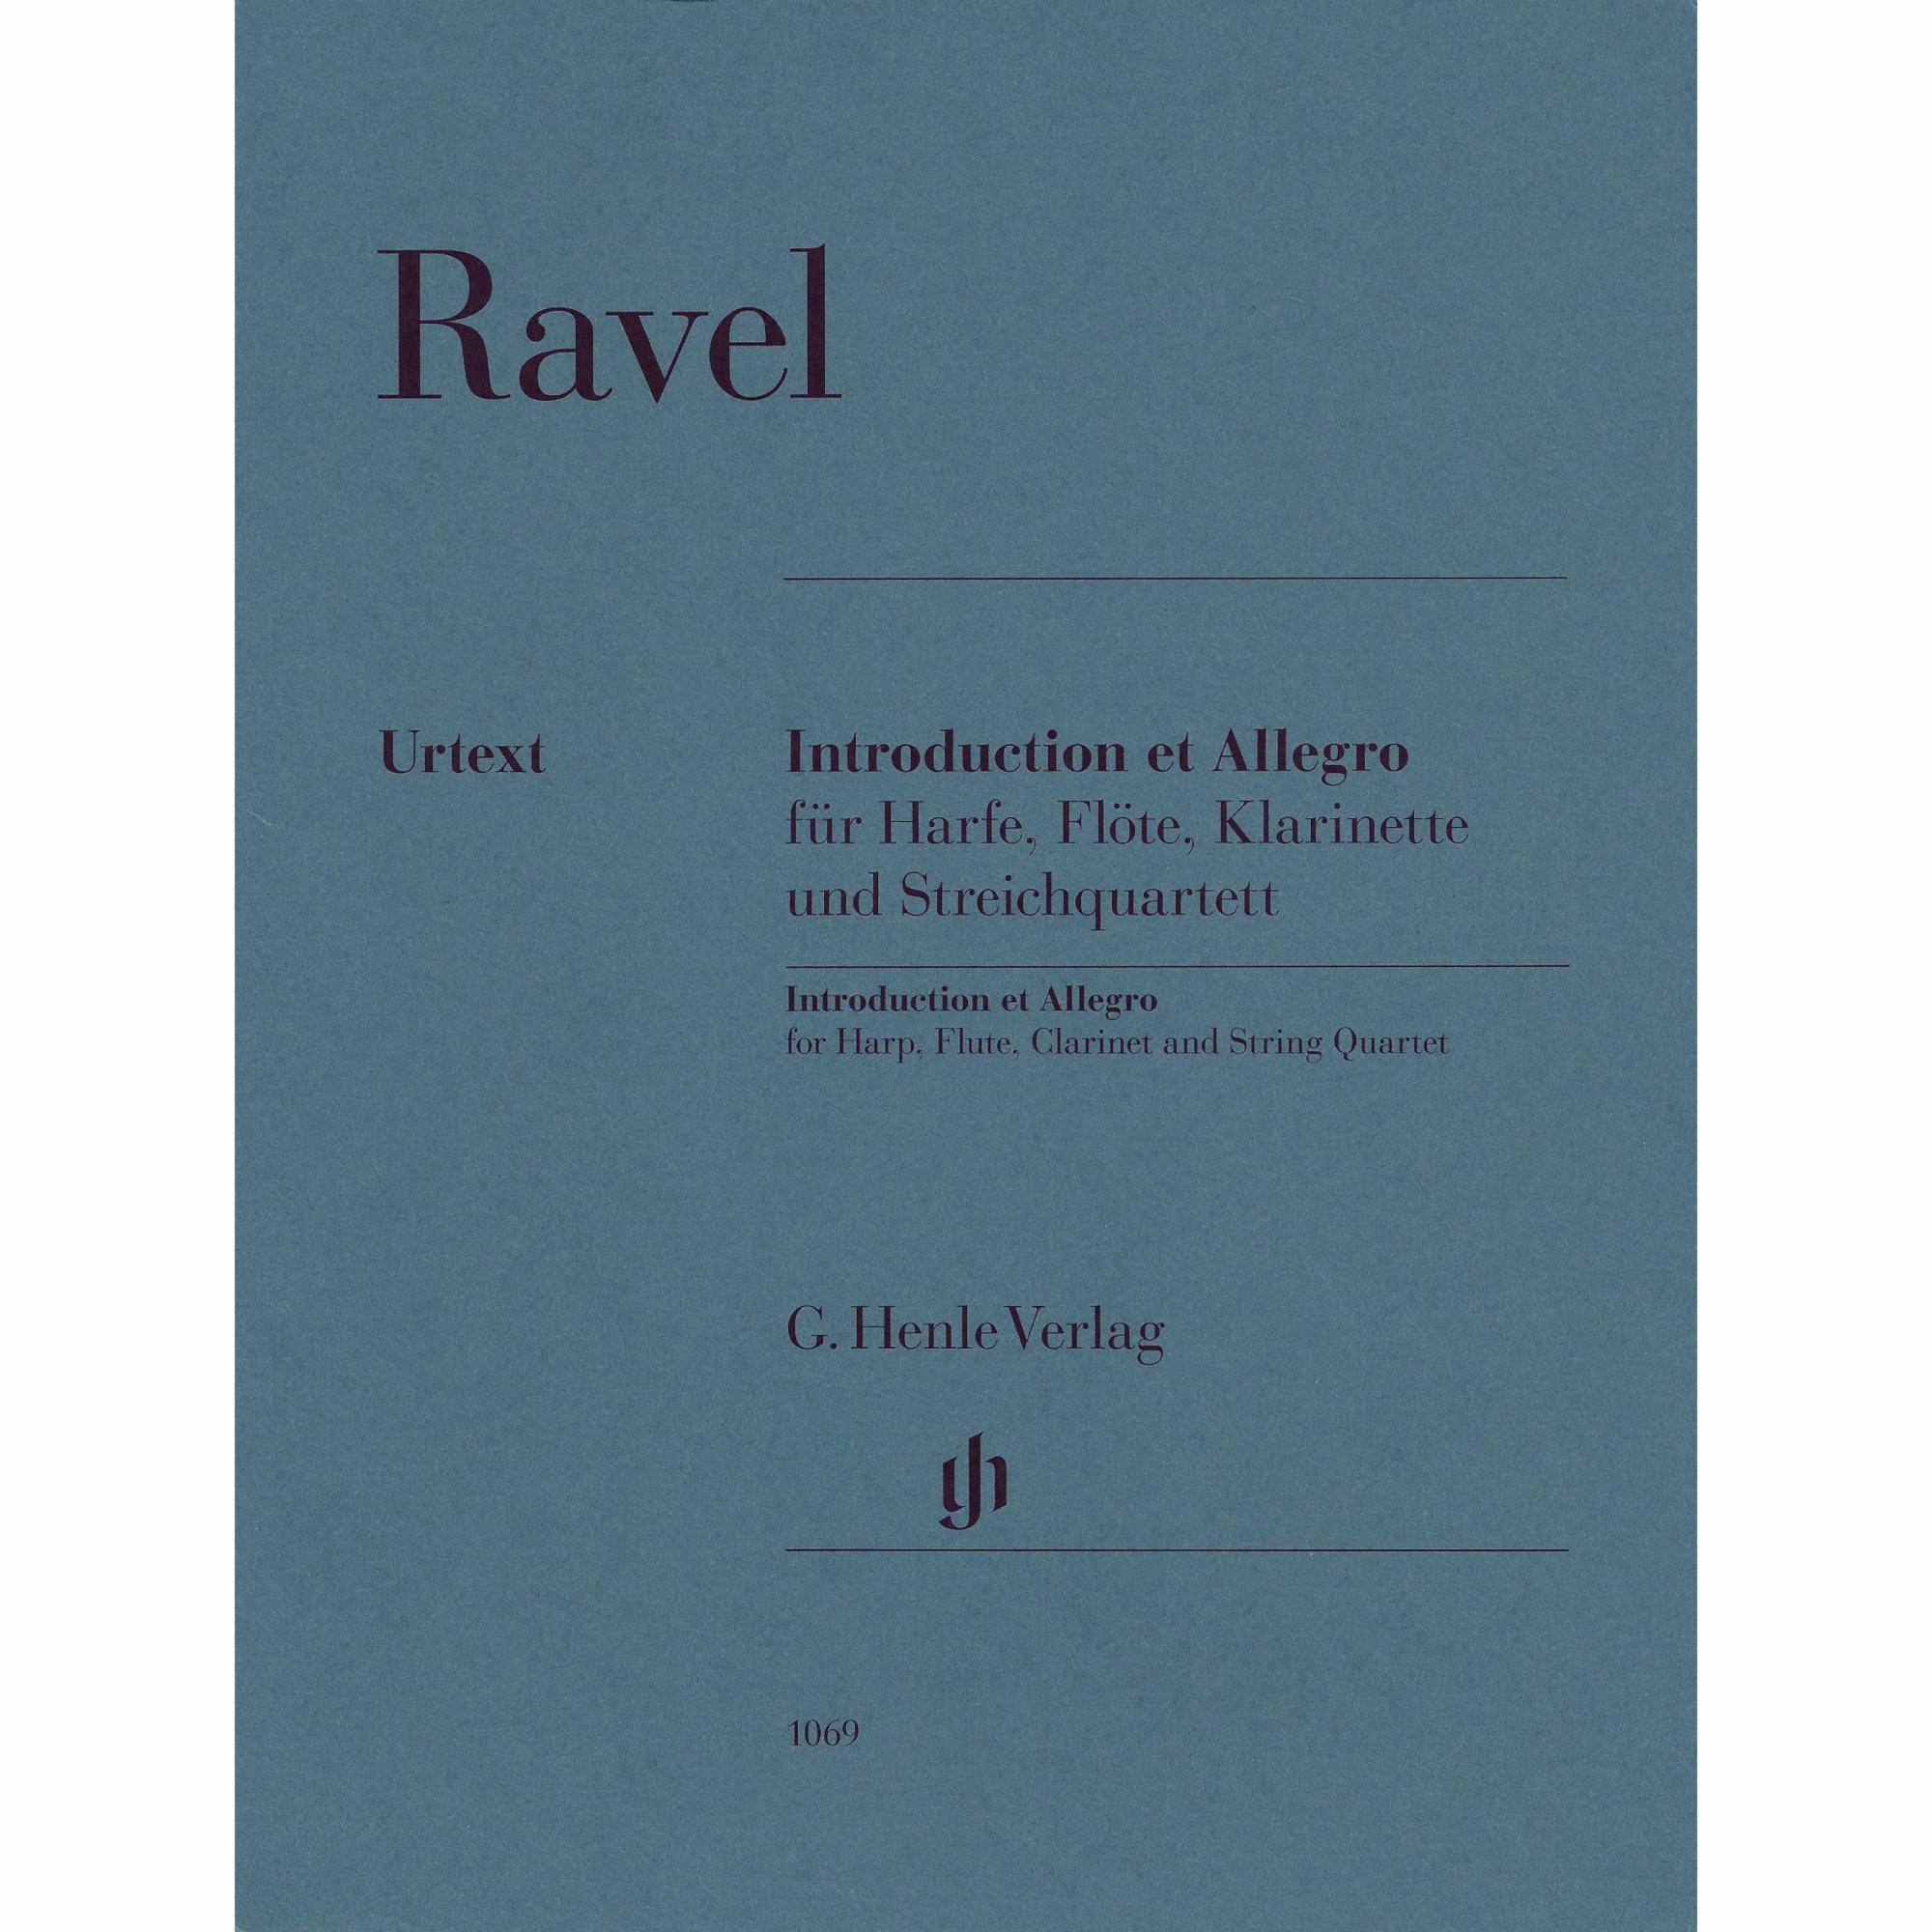 Ravel -- Introduction and Allegro for Harp, Flute, Clarinet, and String Quartet